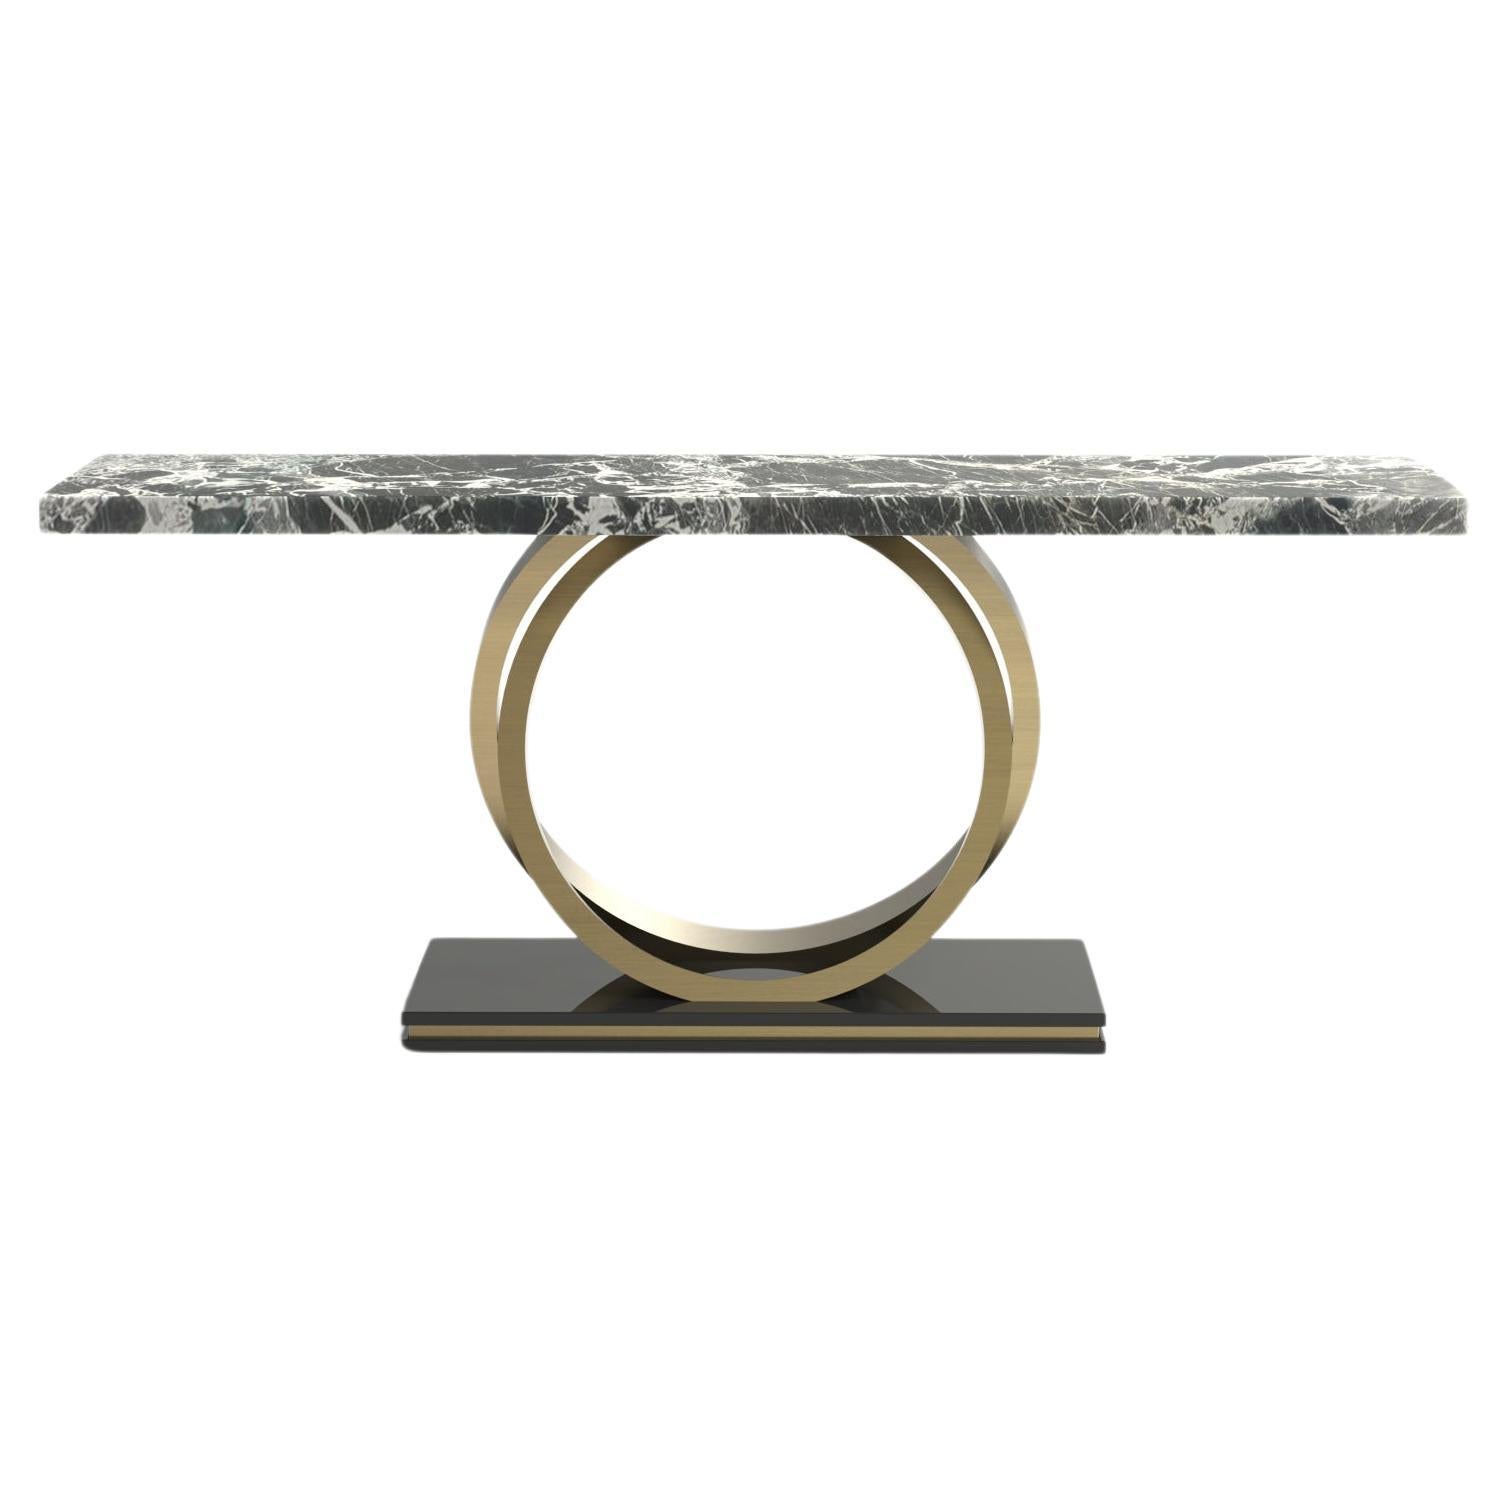 Art Deco Armilar Console Table, Antique Marble, Handmade Portugal by Greenapple For Sale